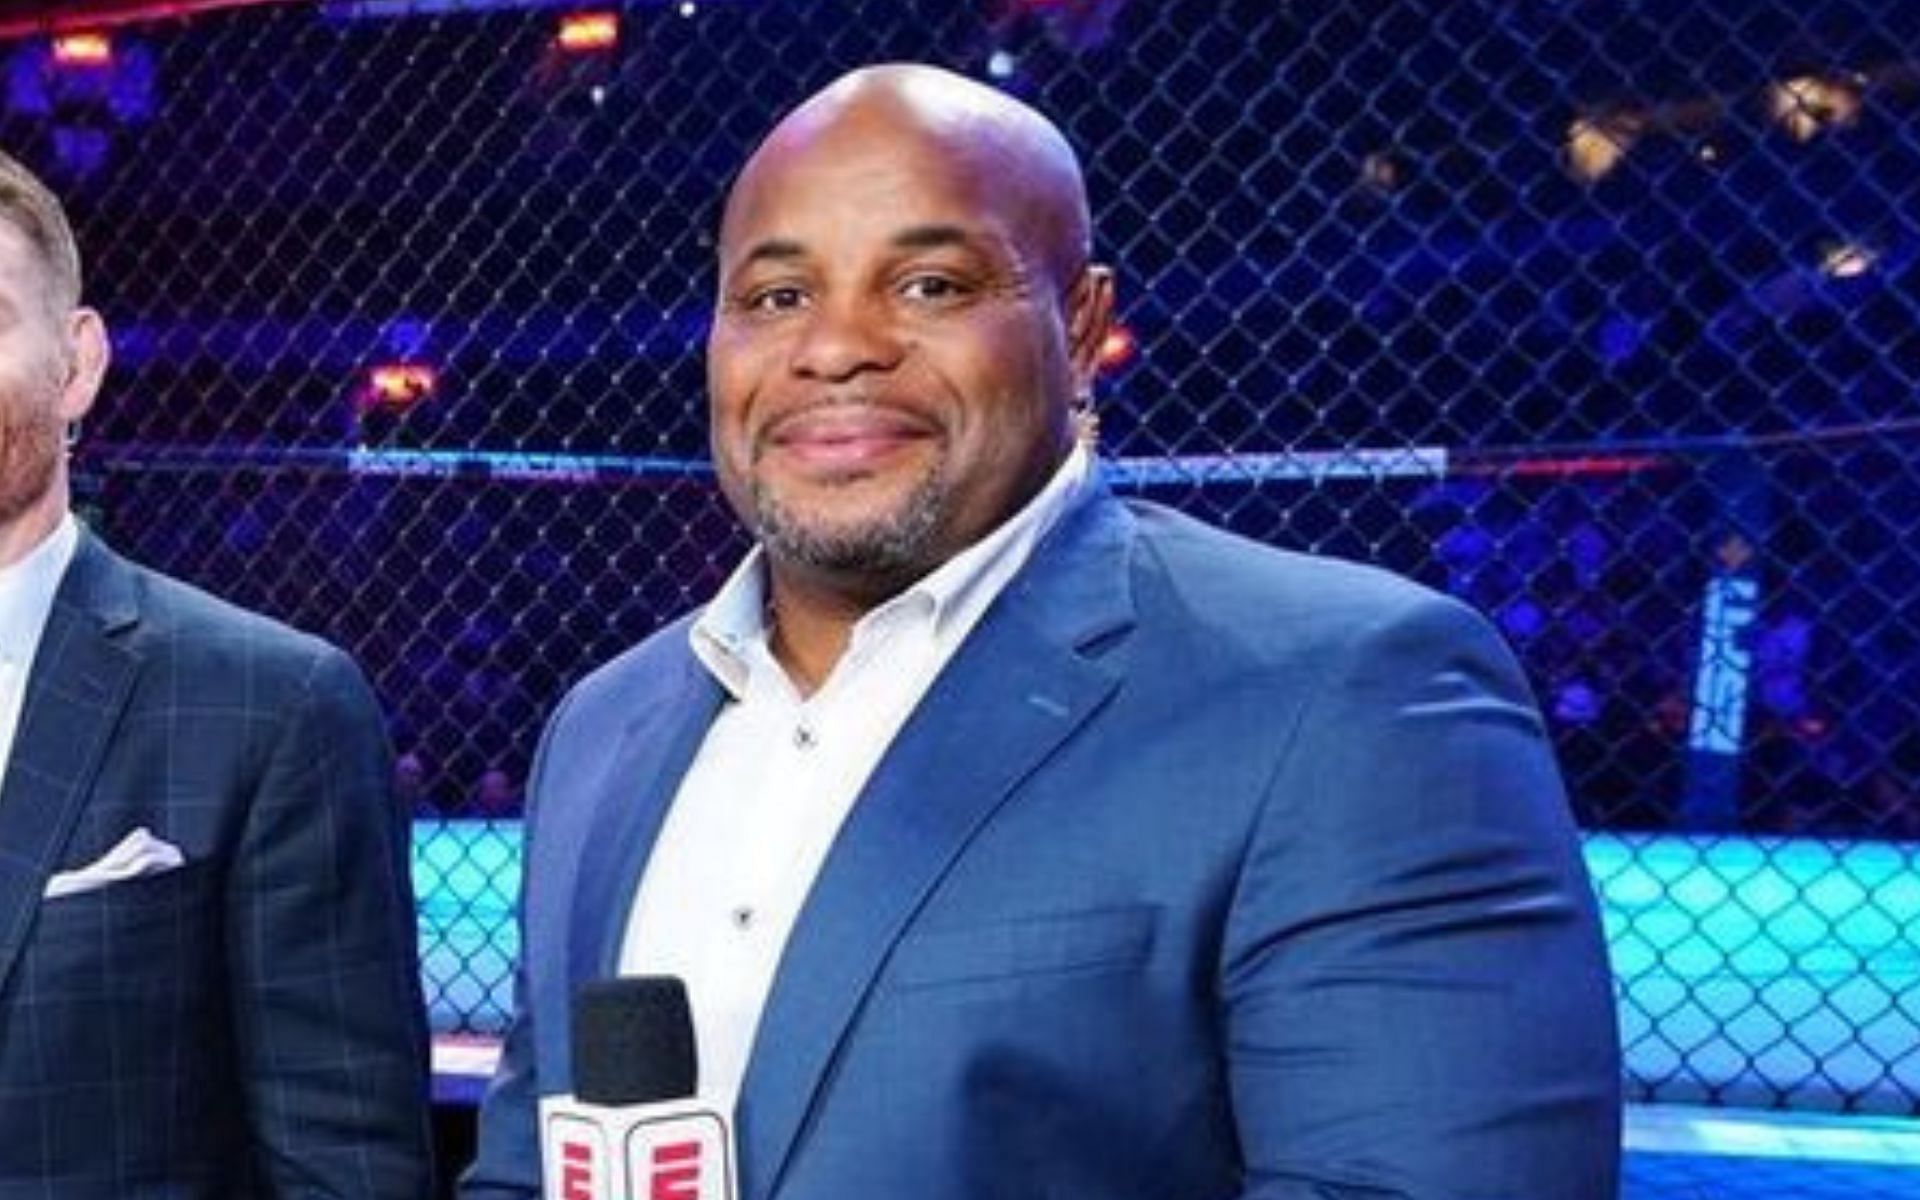 Daniel Cormier during one of the UFC broadcasts [Image courtesy @dc_mma on Instagram]